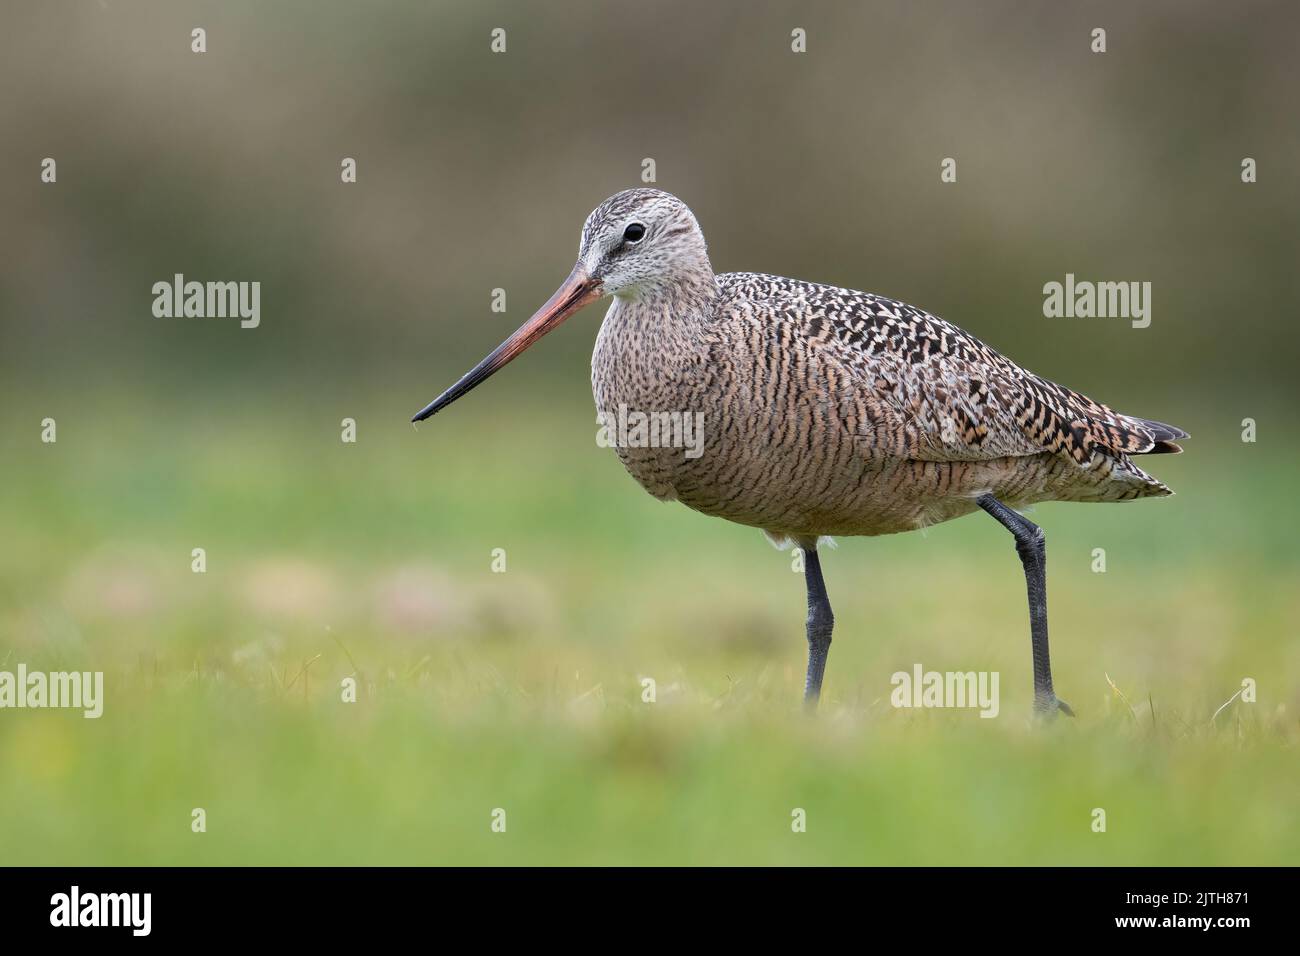 A Marbled godwit walks among the grass at the Ocean Shores Gold Course in Washington. Stock Photo